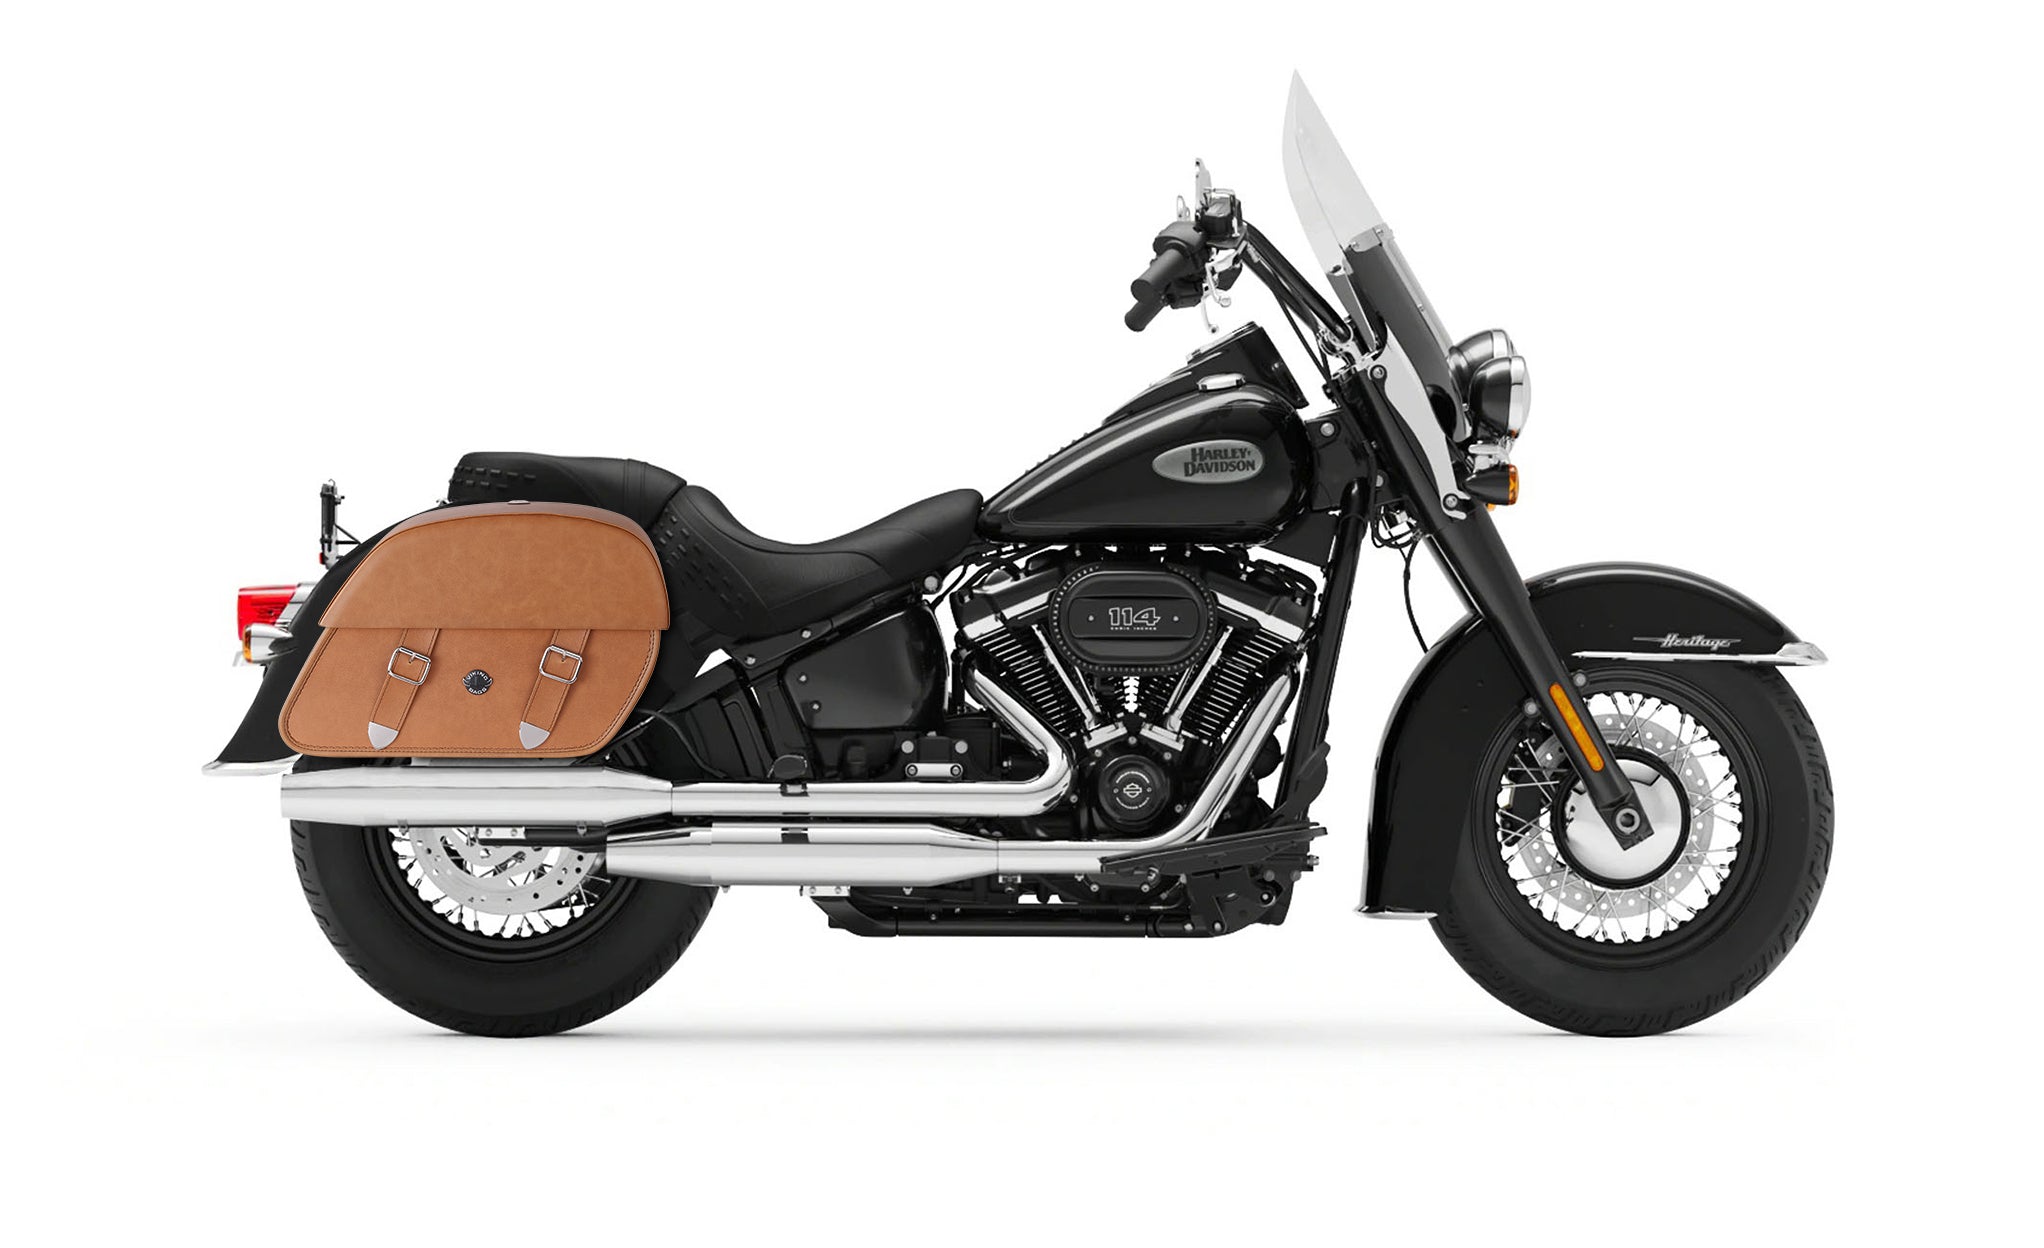 33L - Baelor Brown Large Leather Saddlebags For Harley Softail Heritage FLHC/S @expand